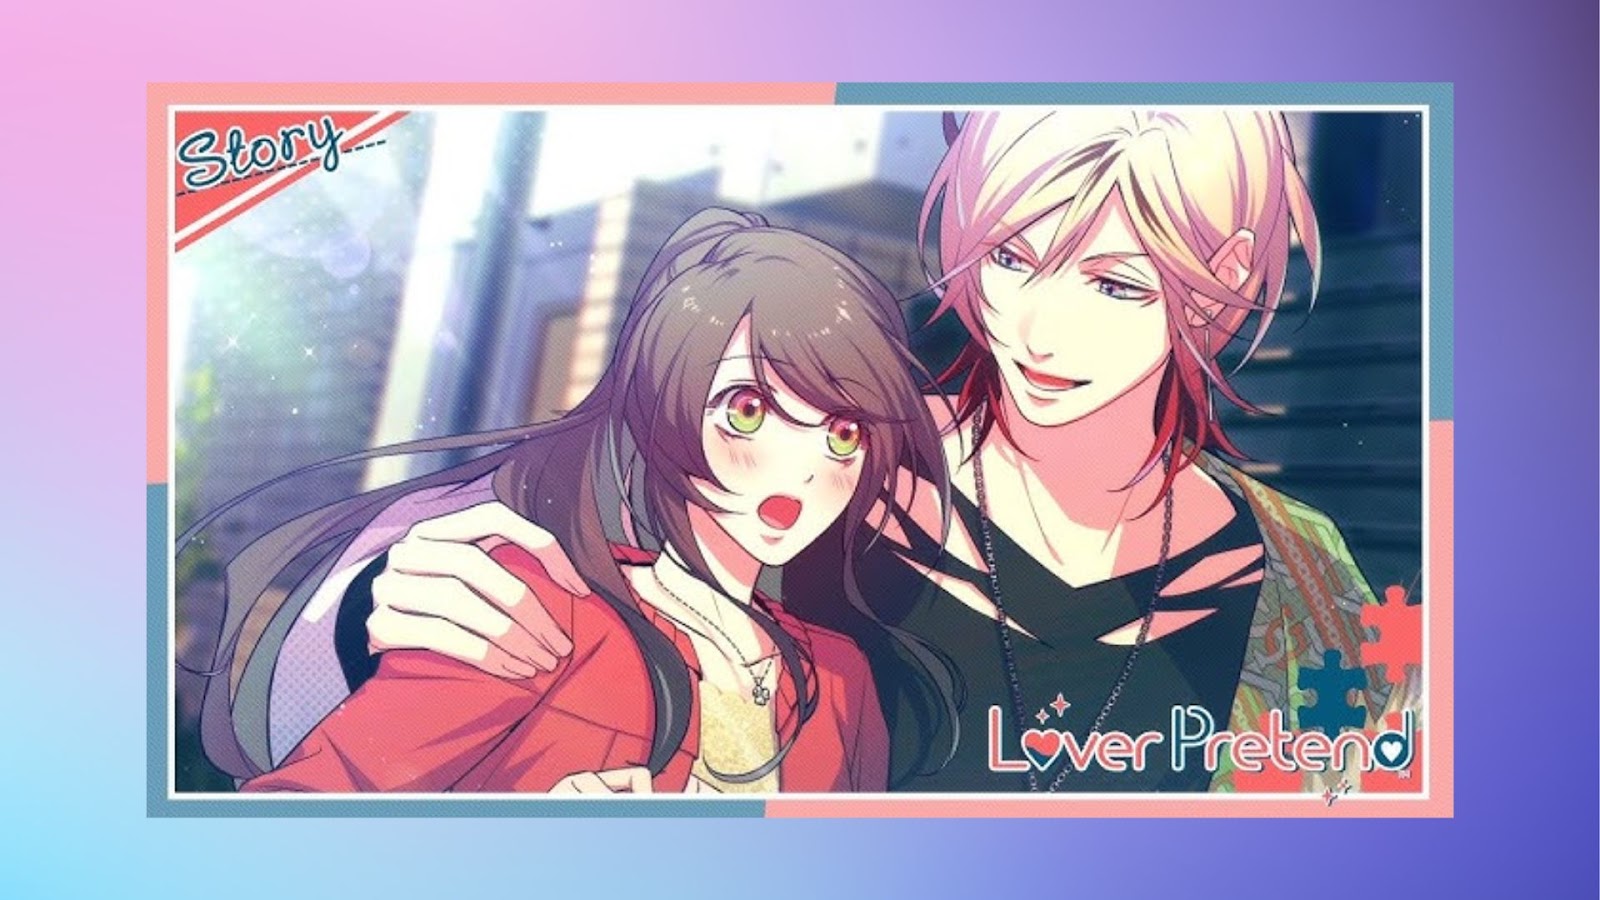 The Lover Pretend - Switch Visual Novel